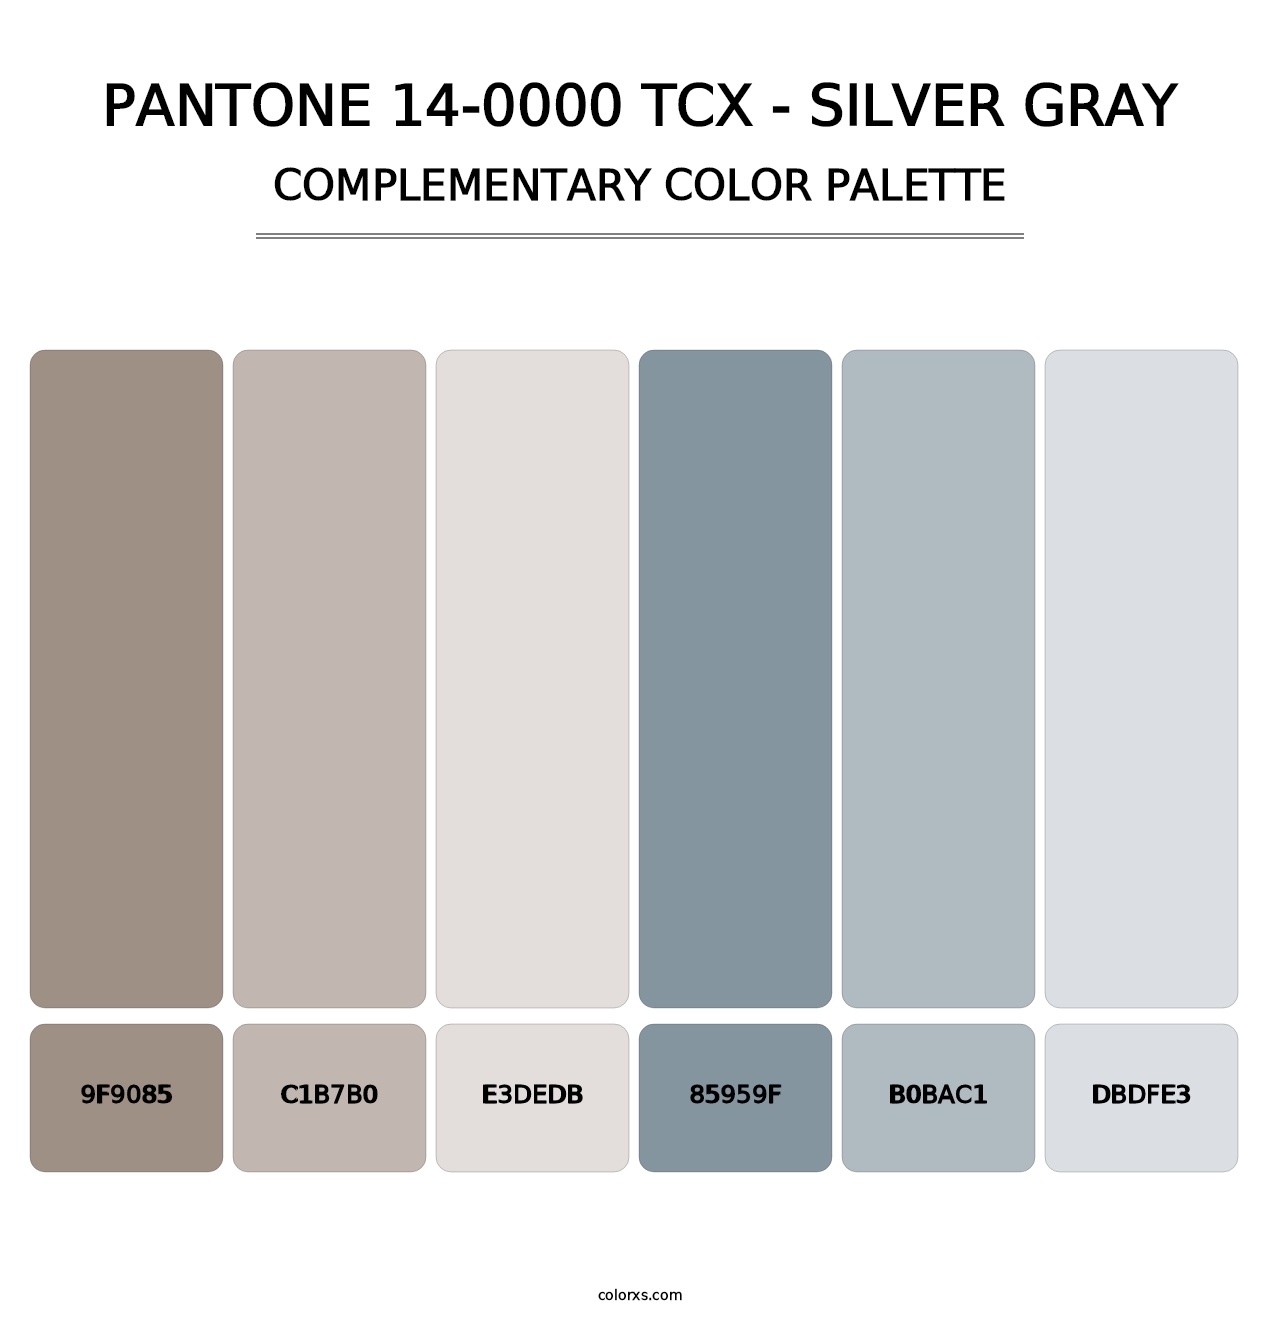 PANTONE 14-0000 TCX - Silver Gray - Complementary Color Palette